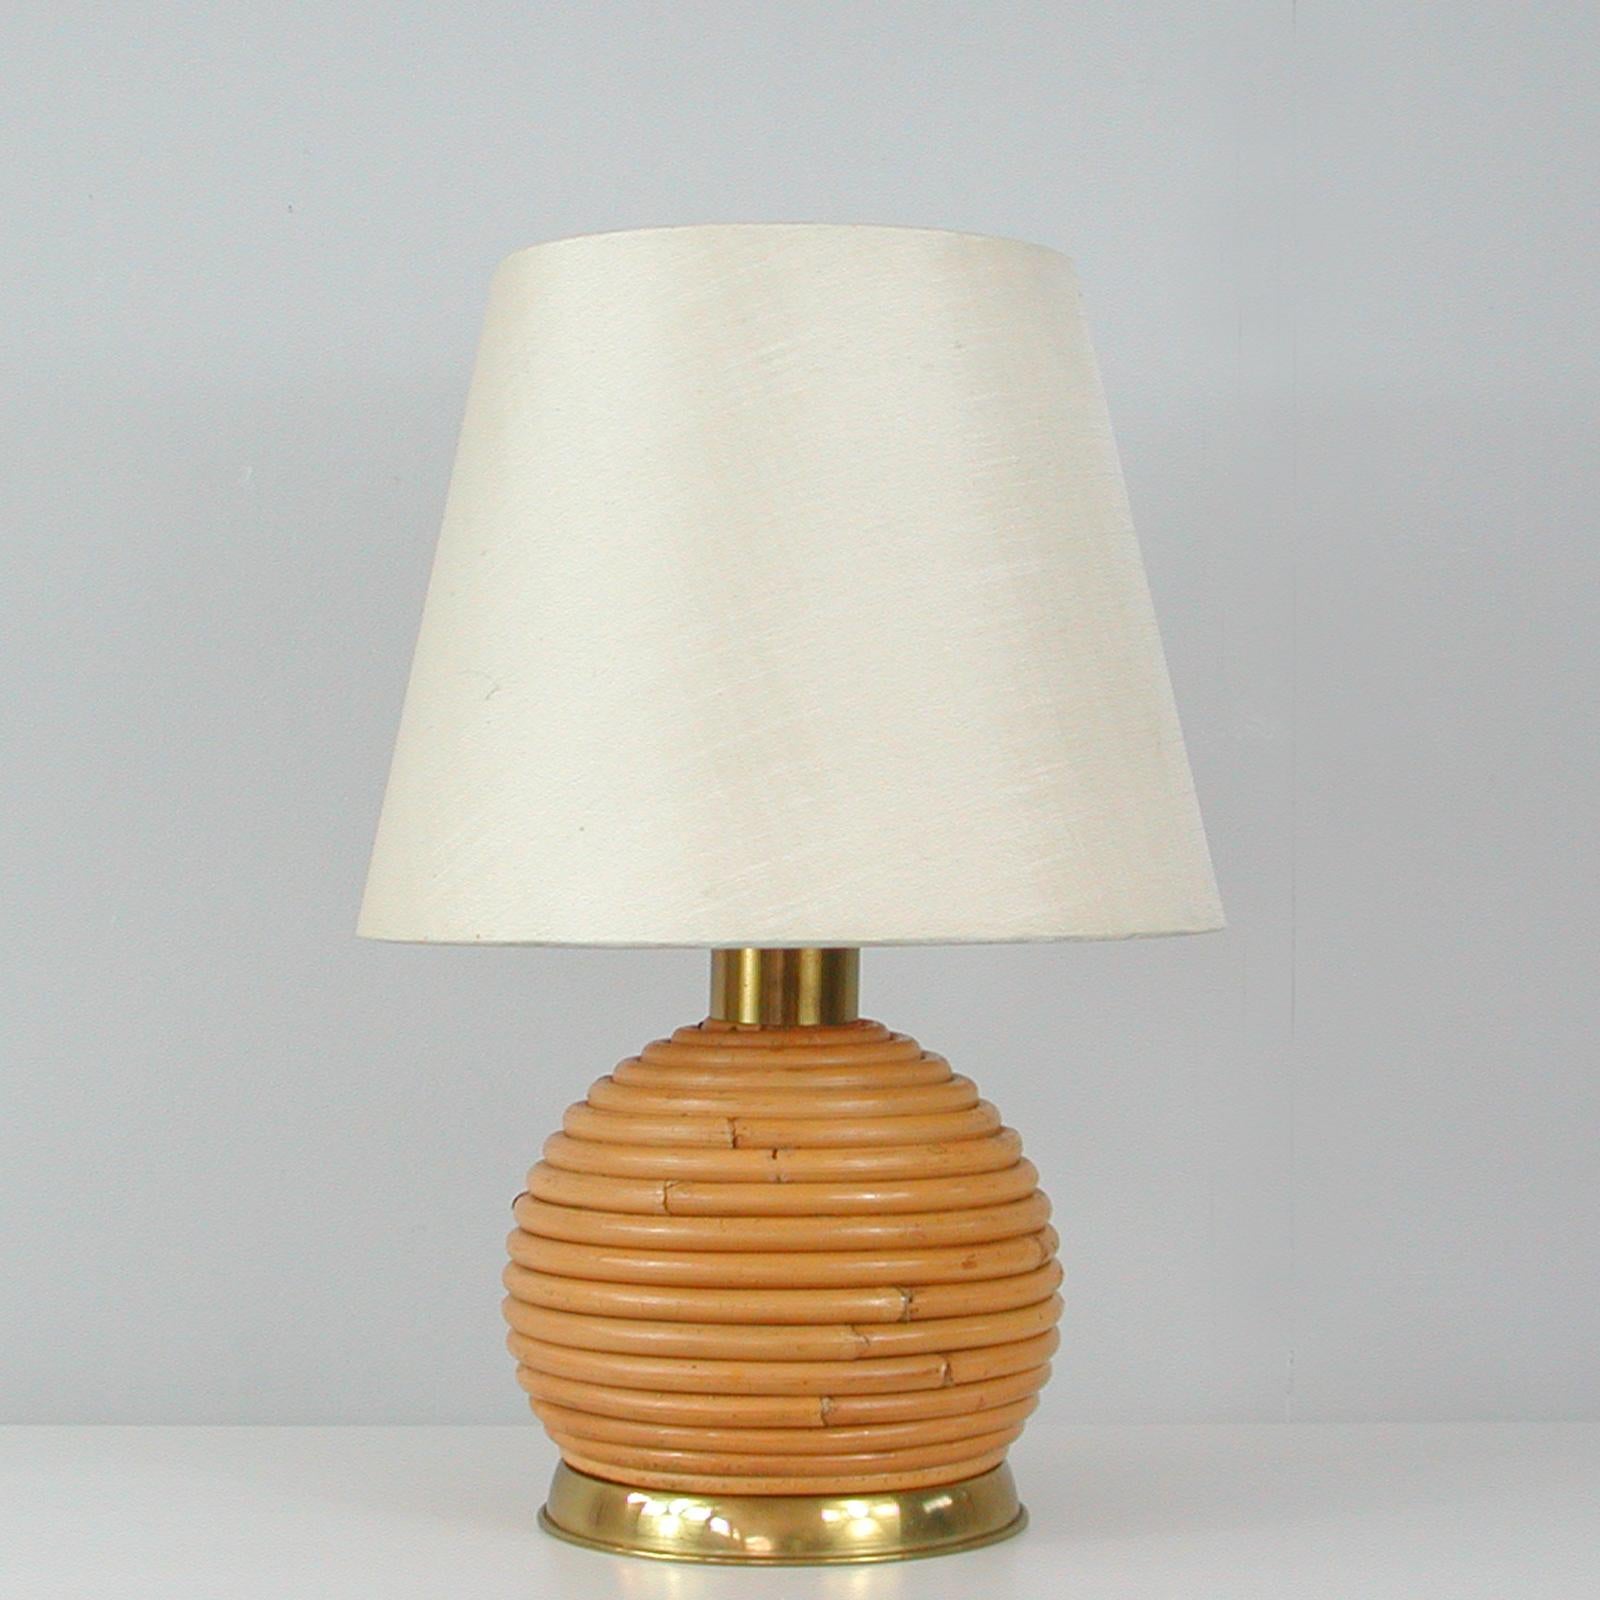 Midcentury Bamboo and Brass Globe Table Lamp, Vivai del Sud attr. Italy 1960s For Sale 6